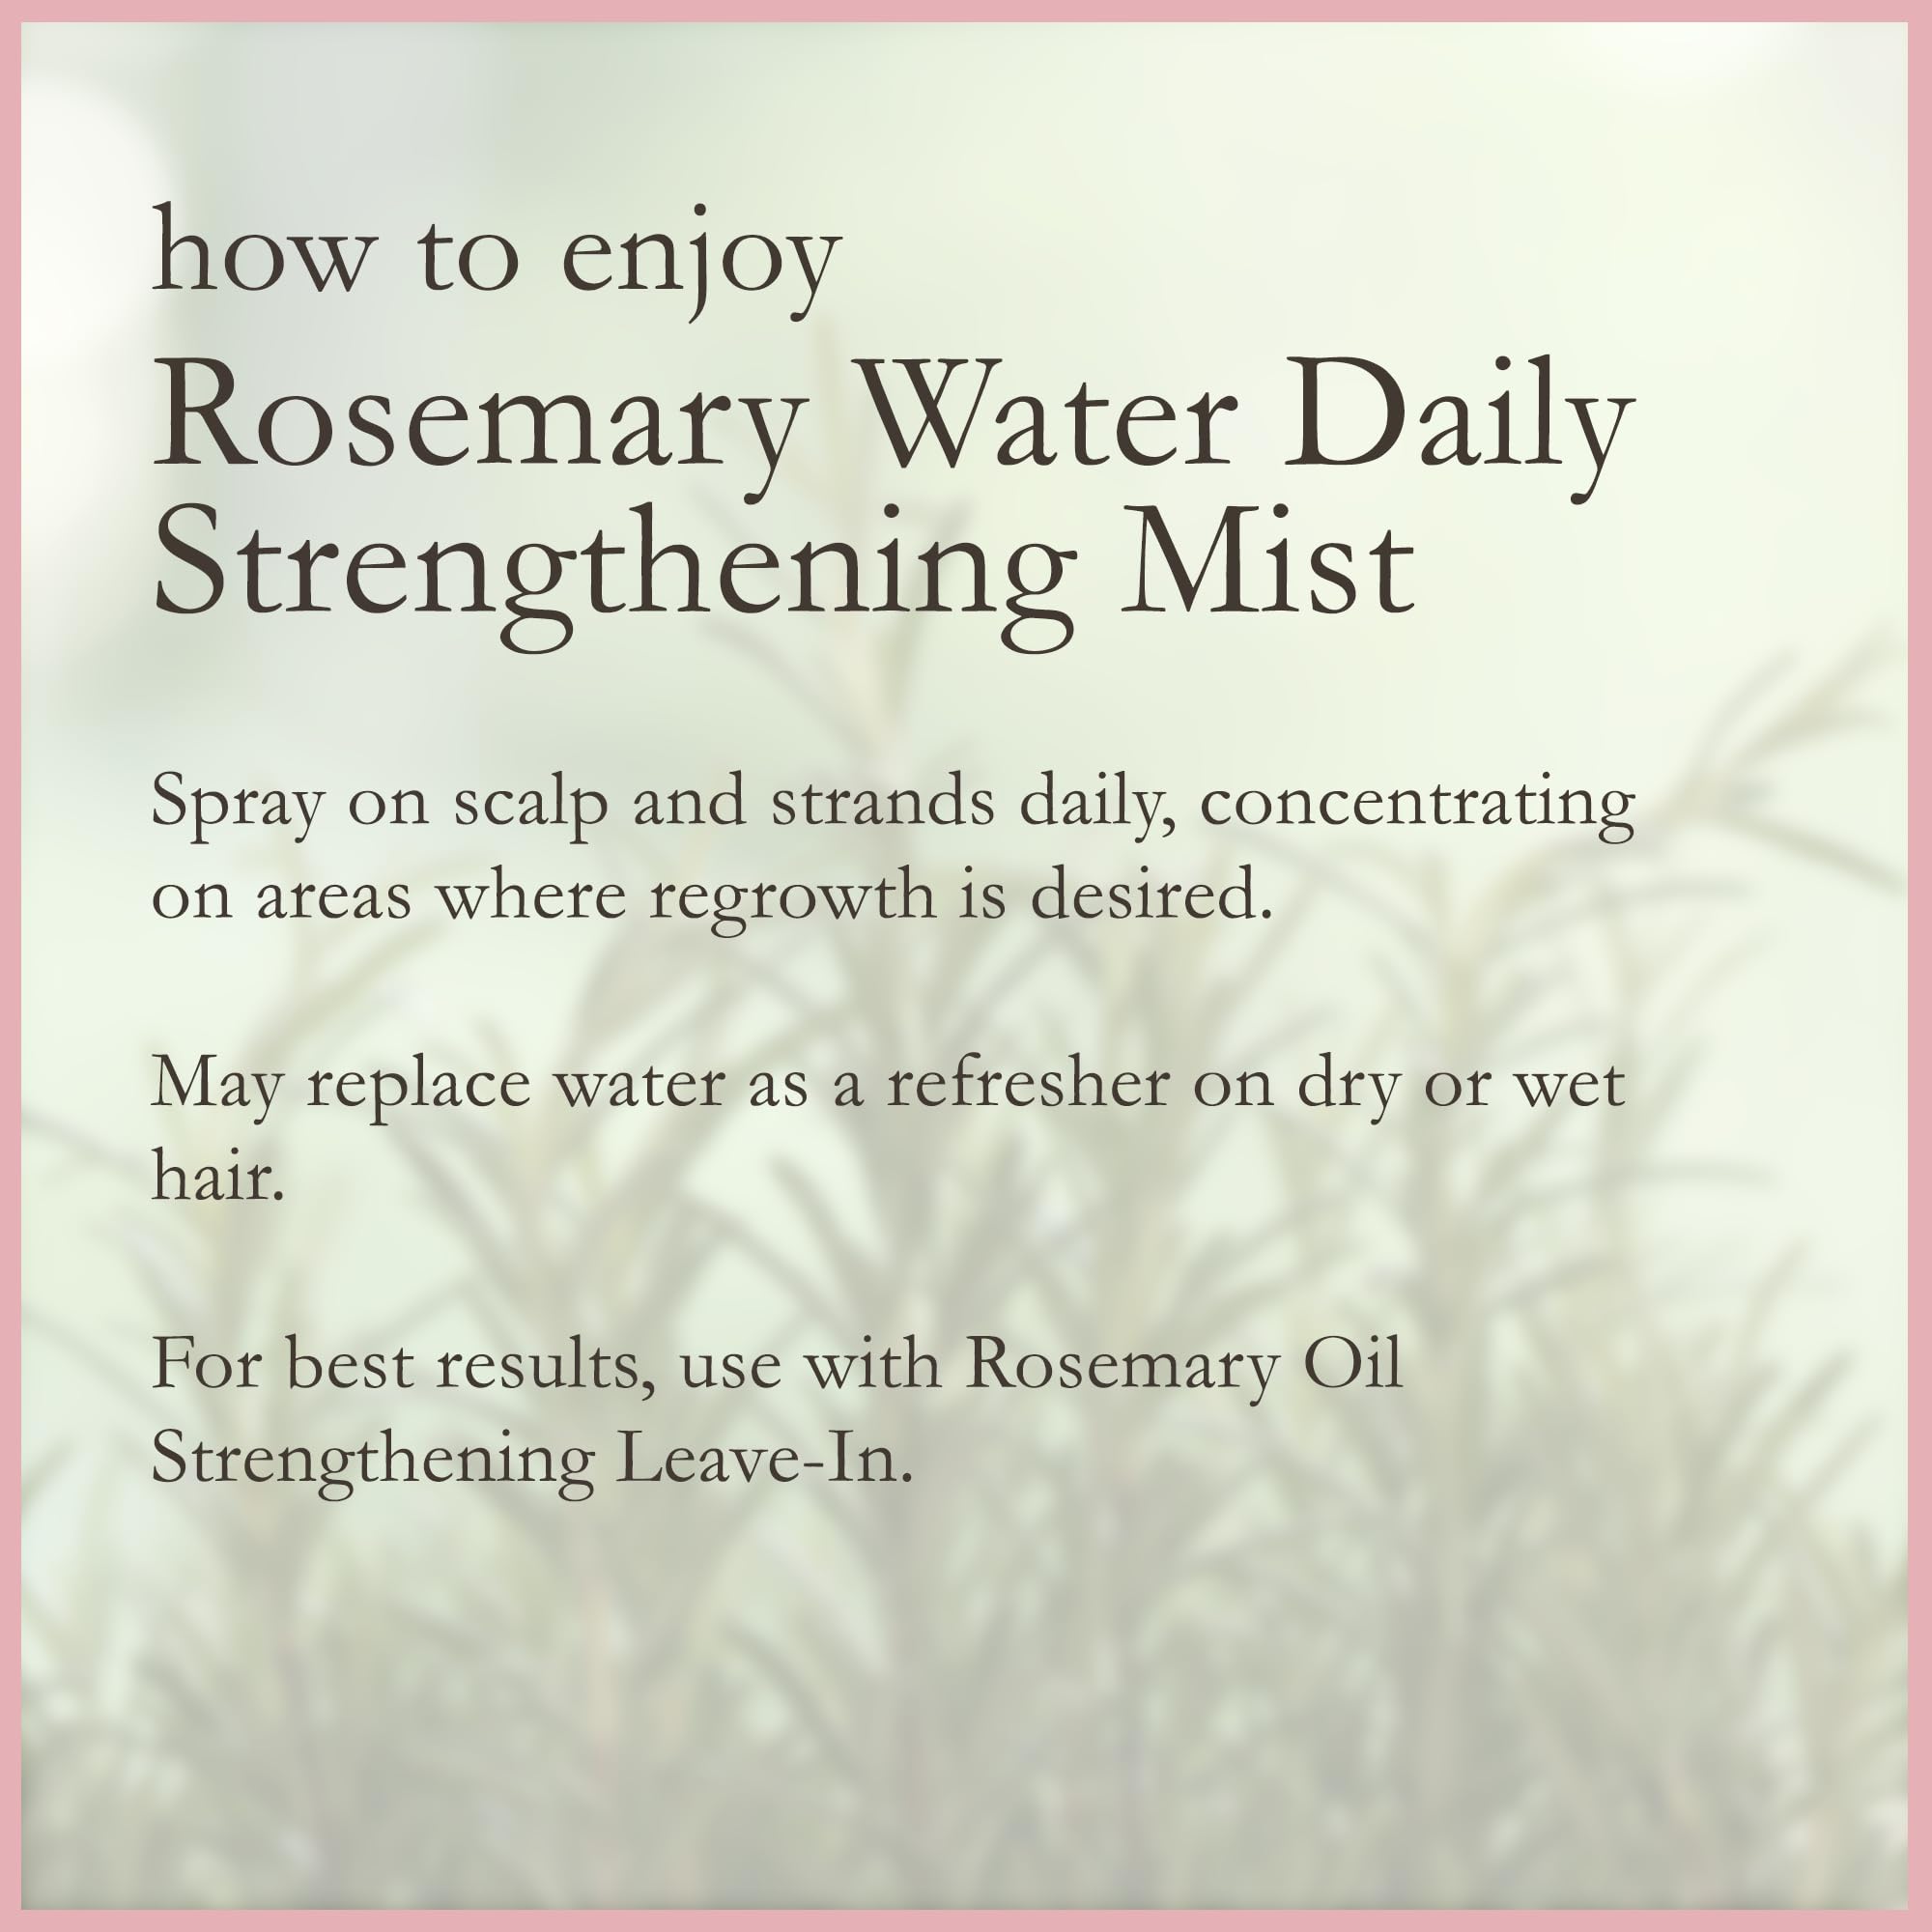 Camille Rose Rosemary Water Daily Strengthening Mist | 8 fl oz | Peppermint Oil, Rosemary Oil & Essential Oils to Strengthen & Encourage Hair Growth